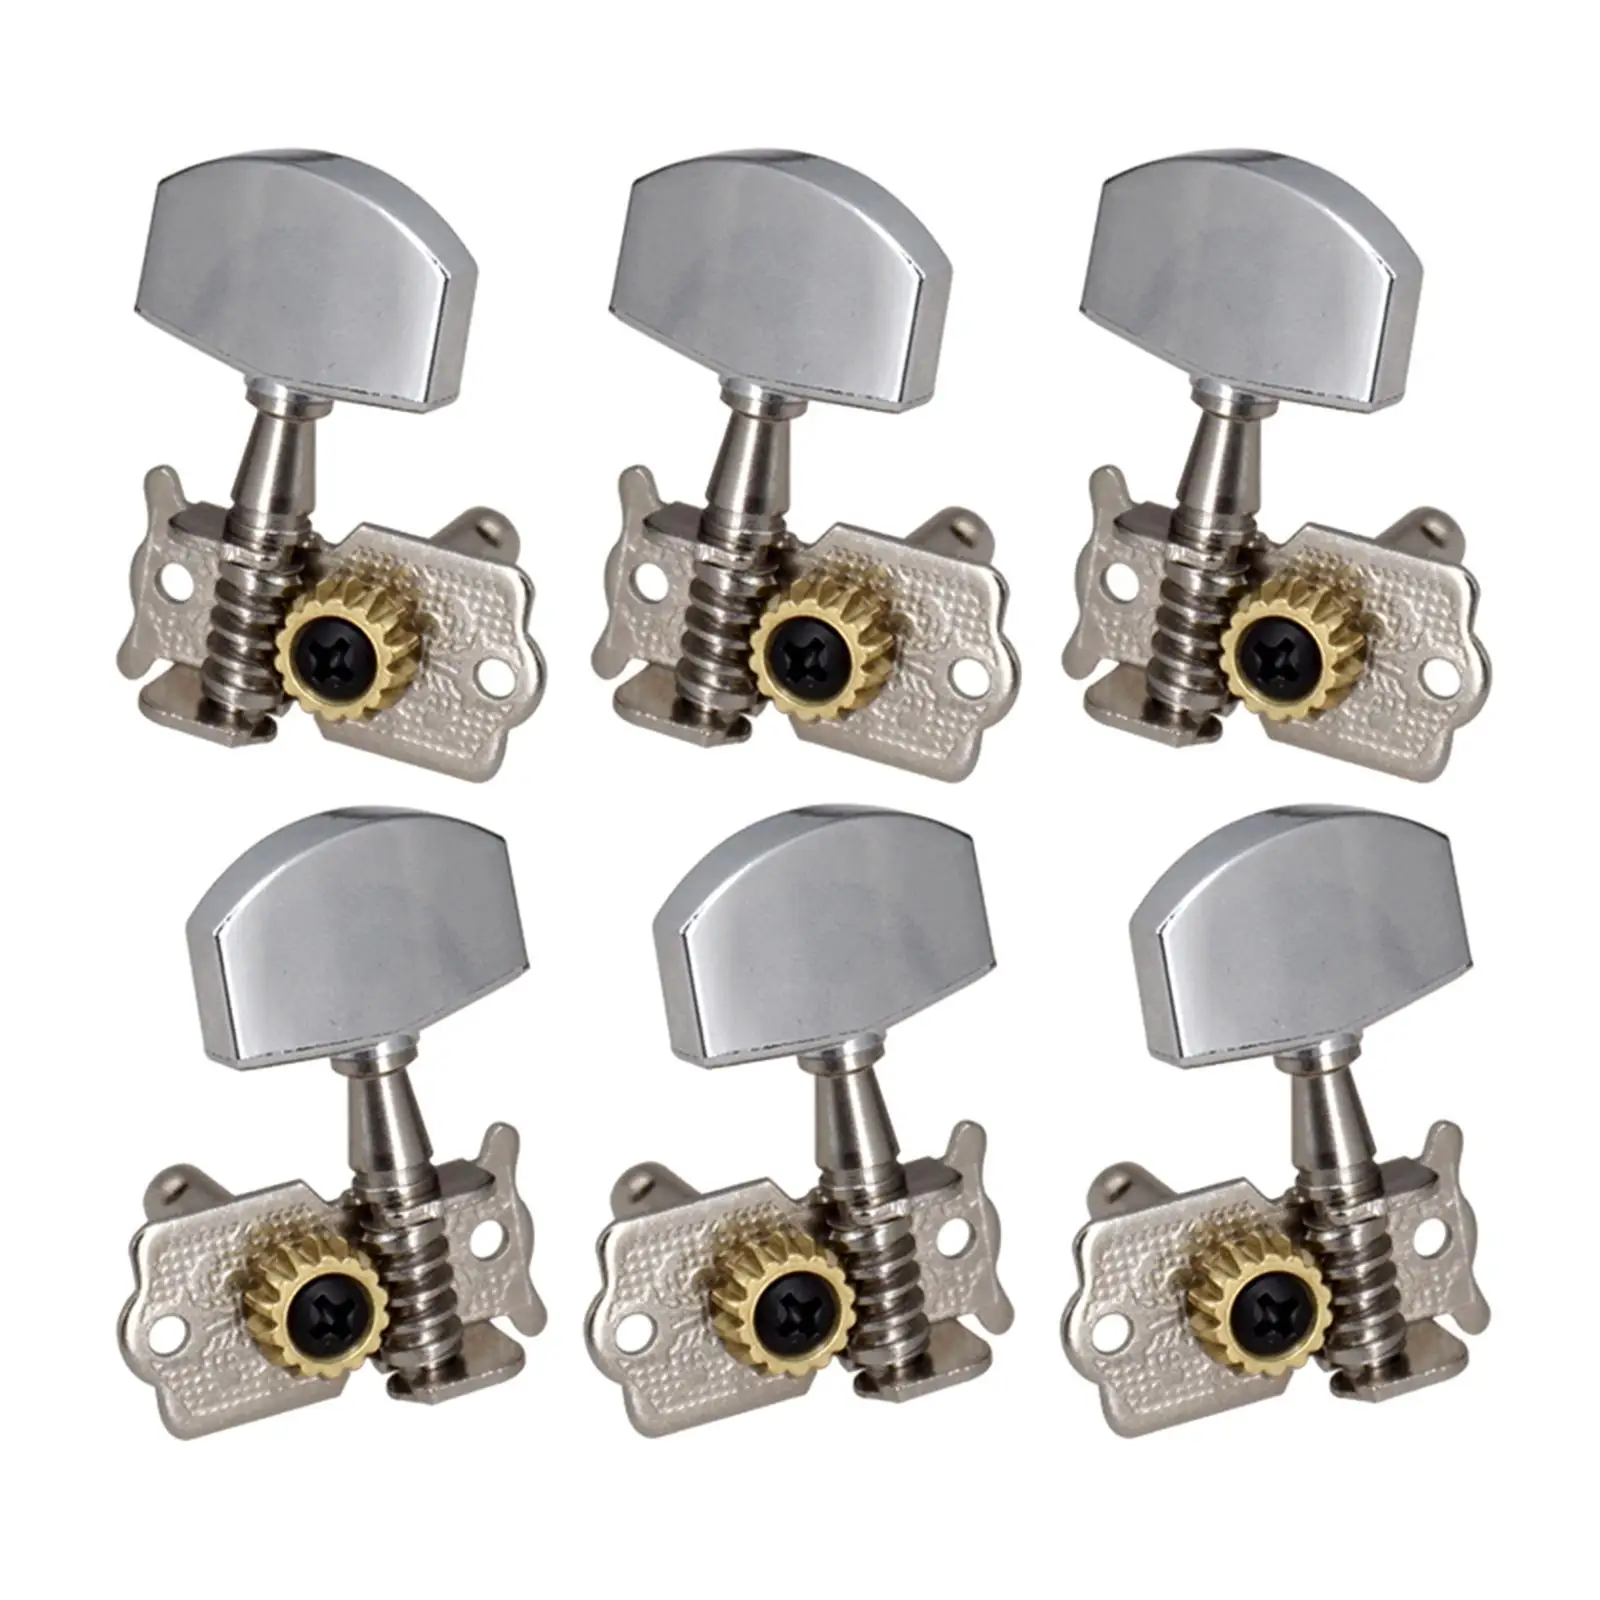 6 Pieces 3L3R Guitar Tuner Pegs Machine Head Key Peg Knobs Tuners for Acoustic Electric Guitar Accs